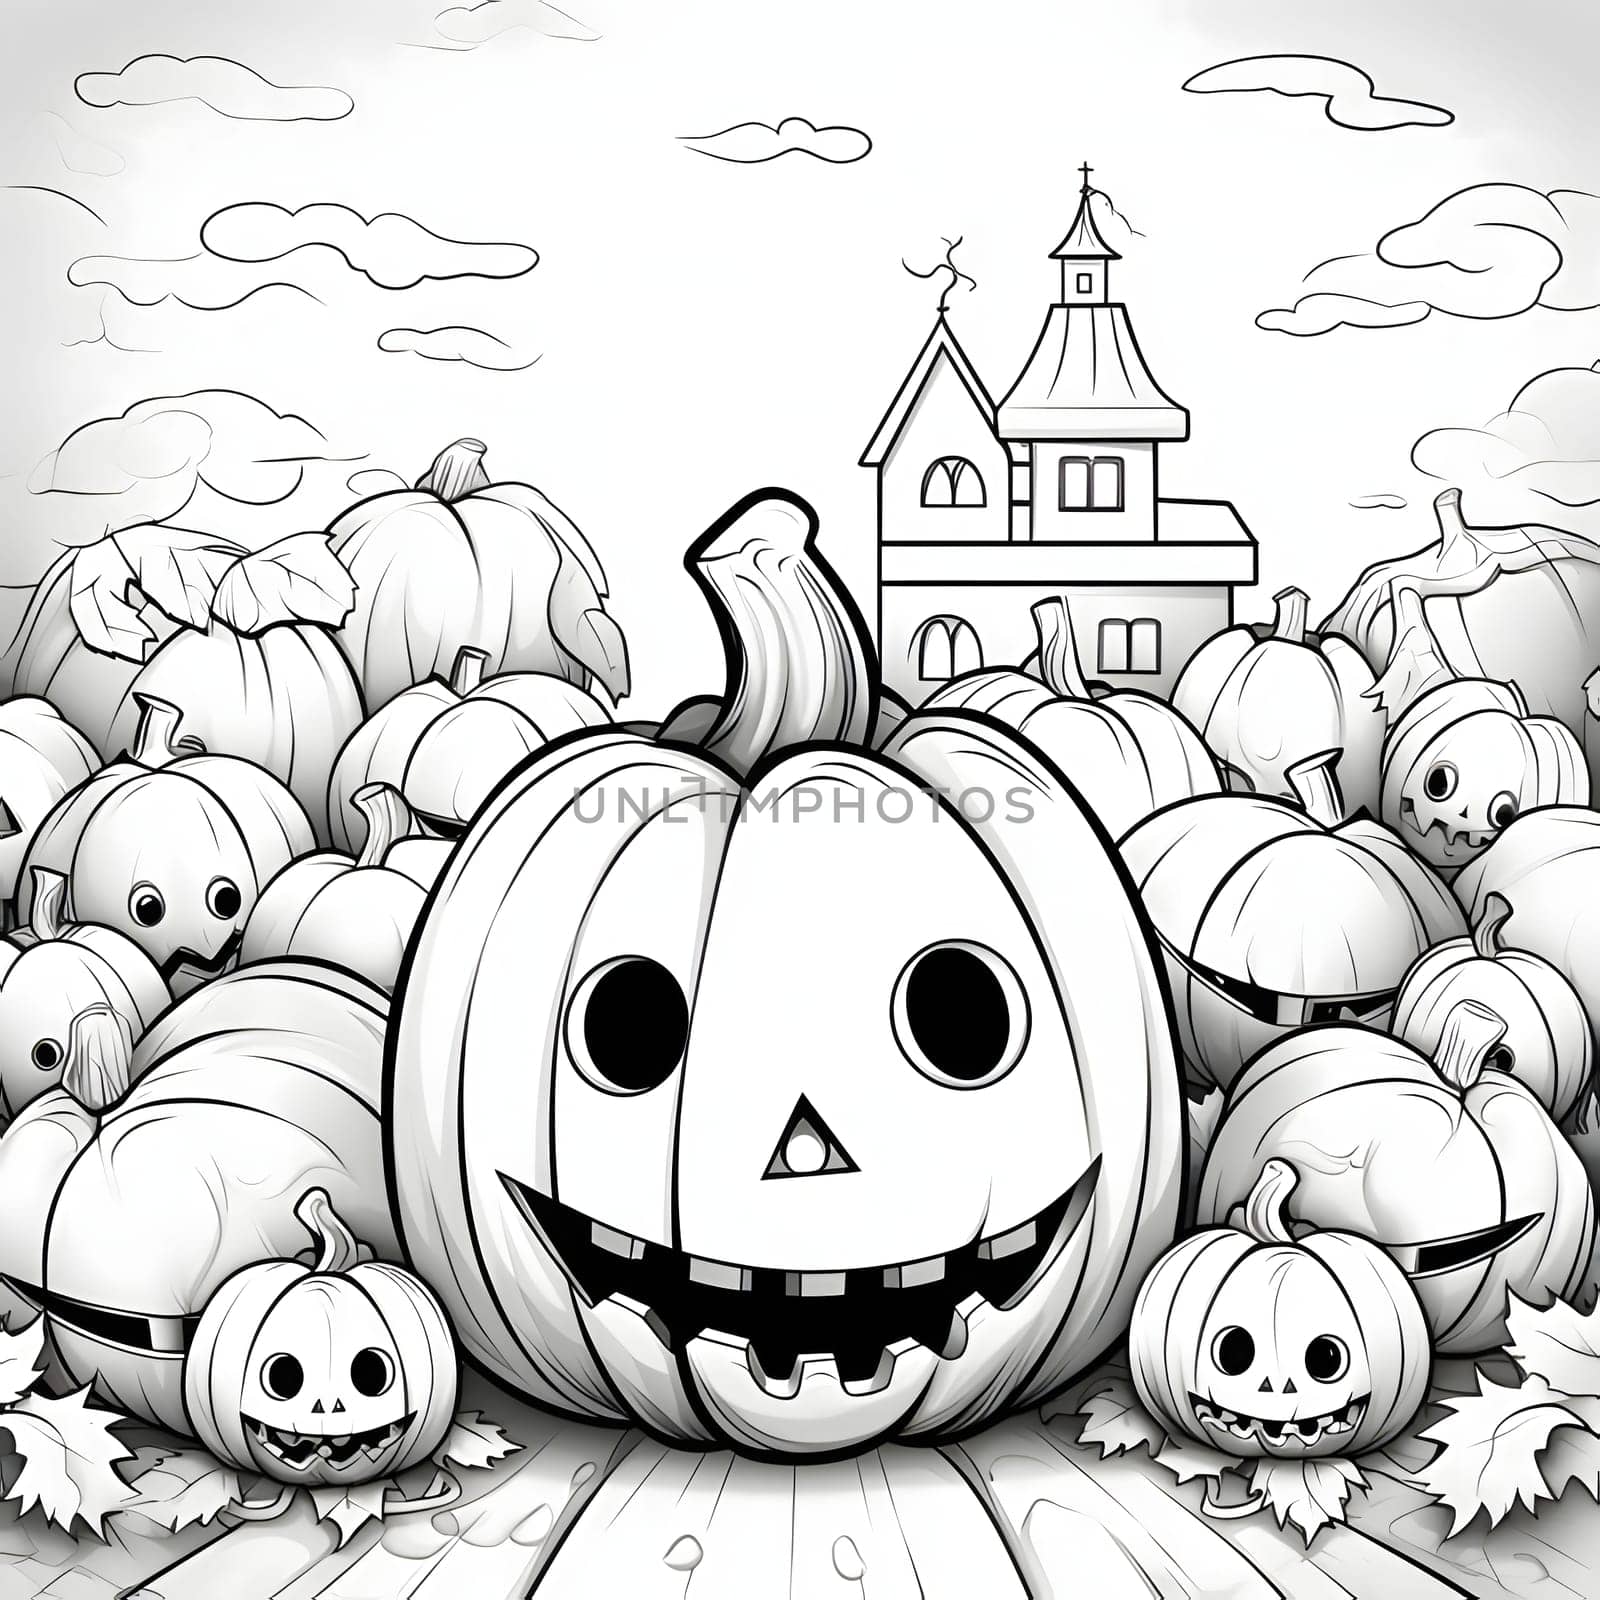 Large jack-o-lantern pumpkin, around smaller ones in the background building, Halloween black and white picture coloring book. by ThemesS